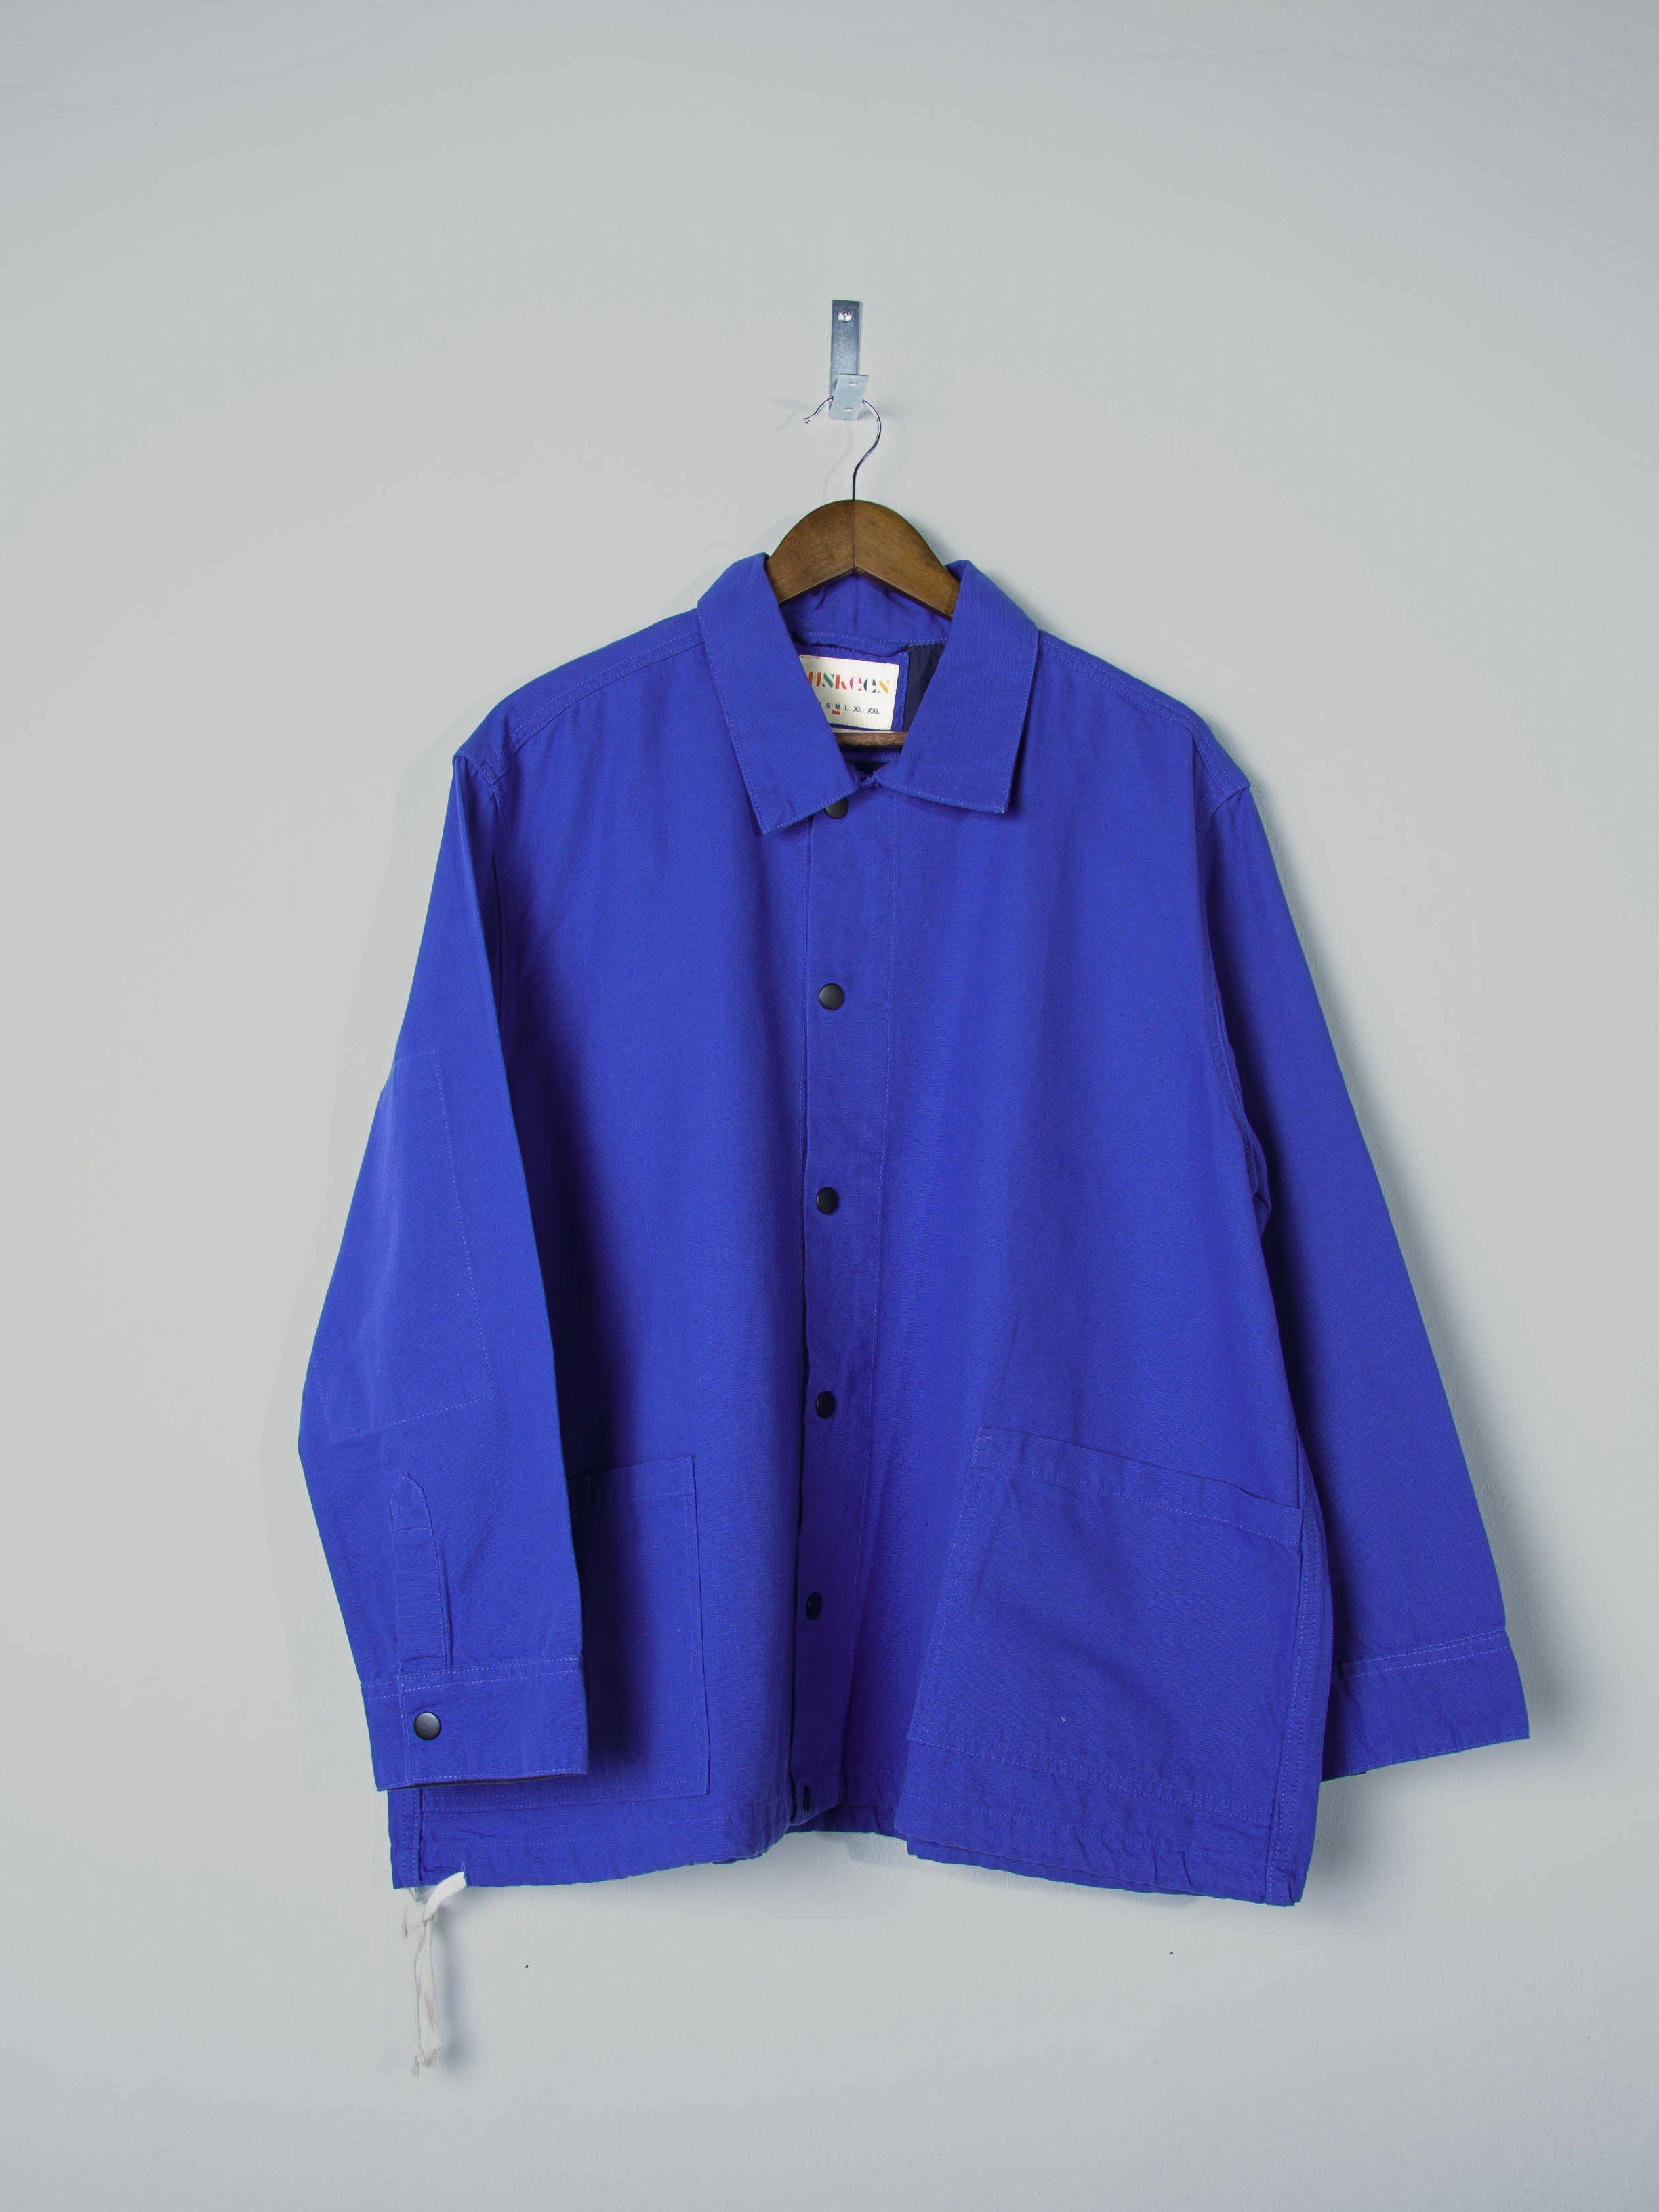 Front view of Uskees ultra blue organic cotton coach jacket with 2 patch pockets, popper fastening and contrast yoke. Presented on hanger.